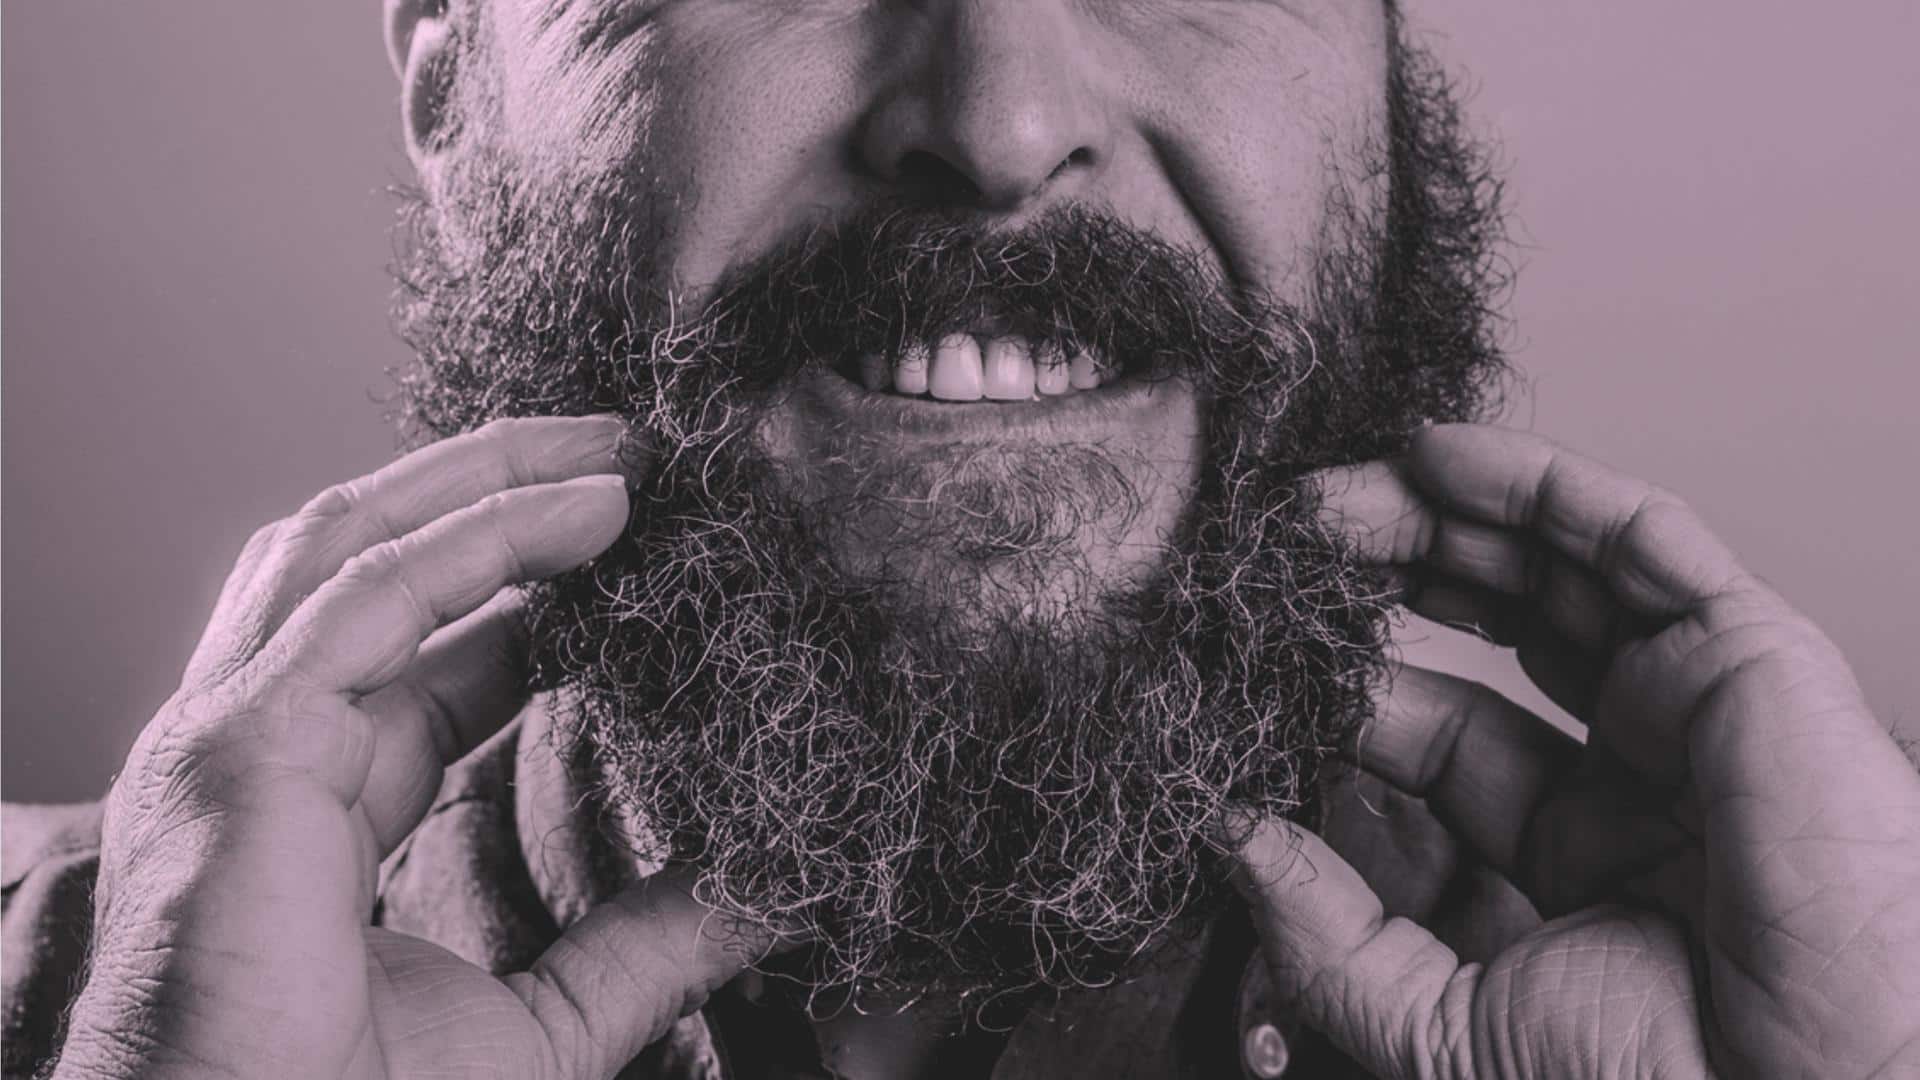 Men, tame your unruly beard with these essential tips